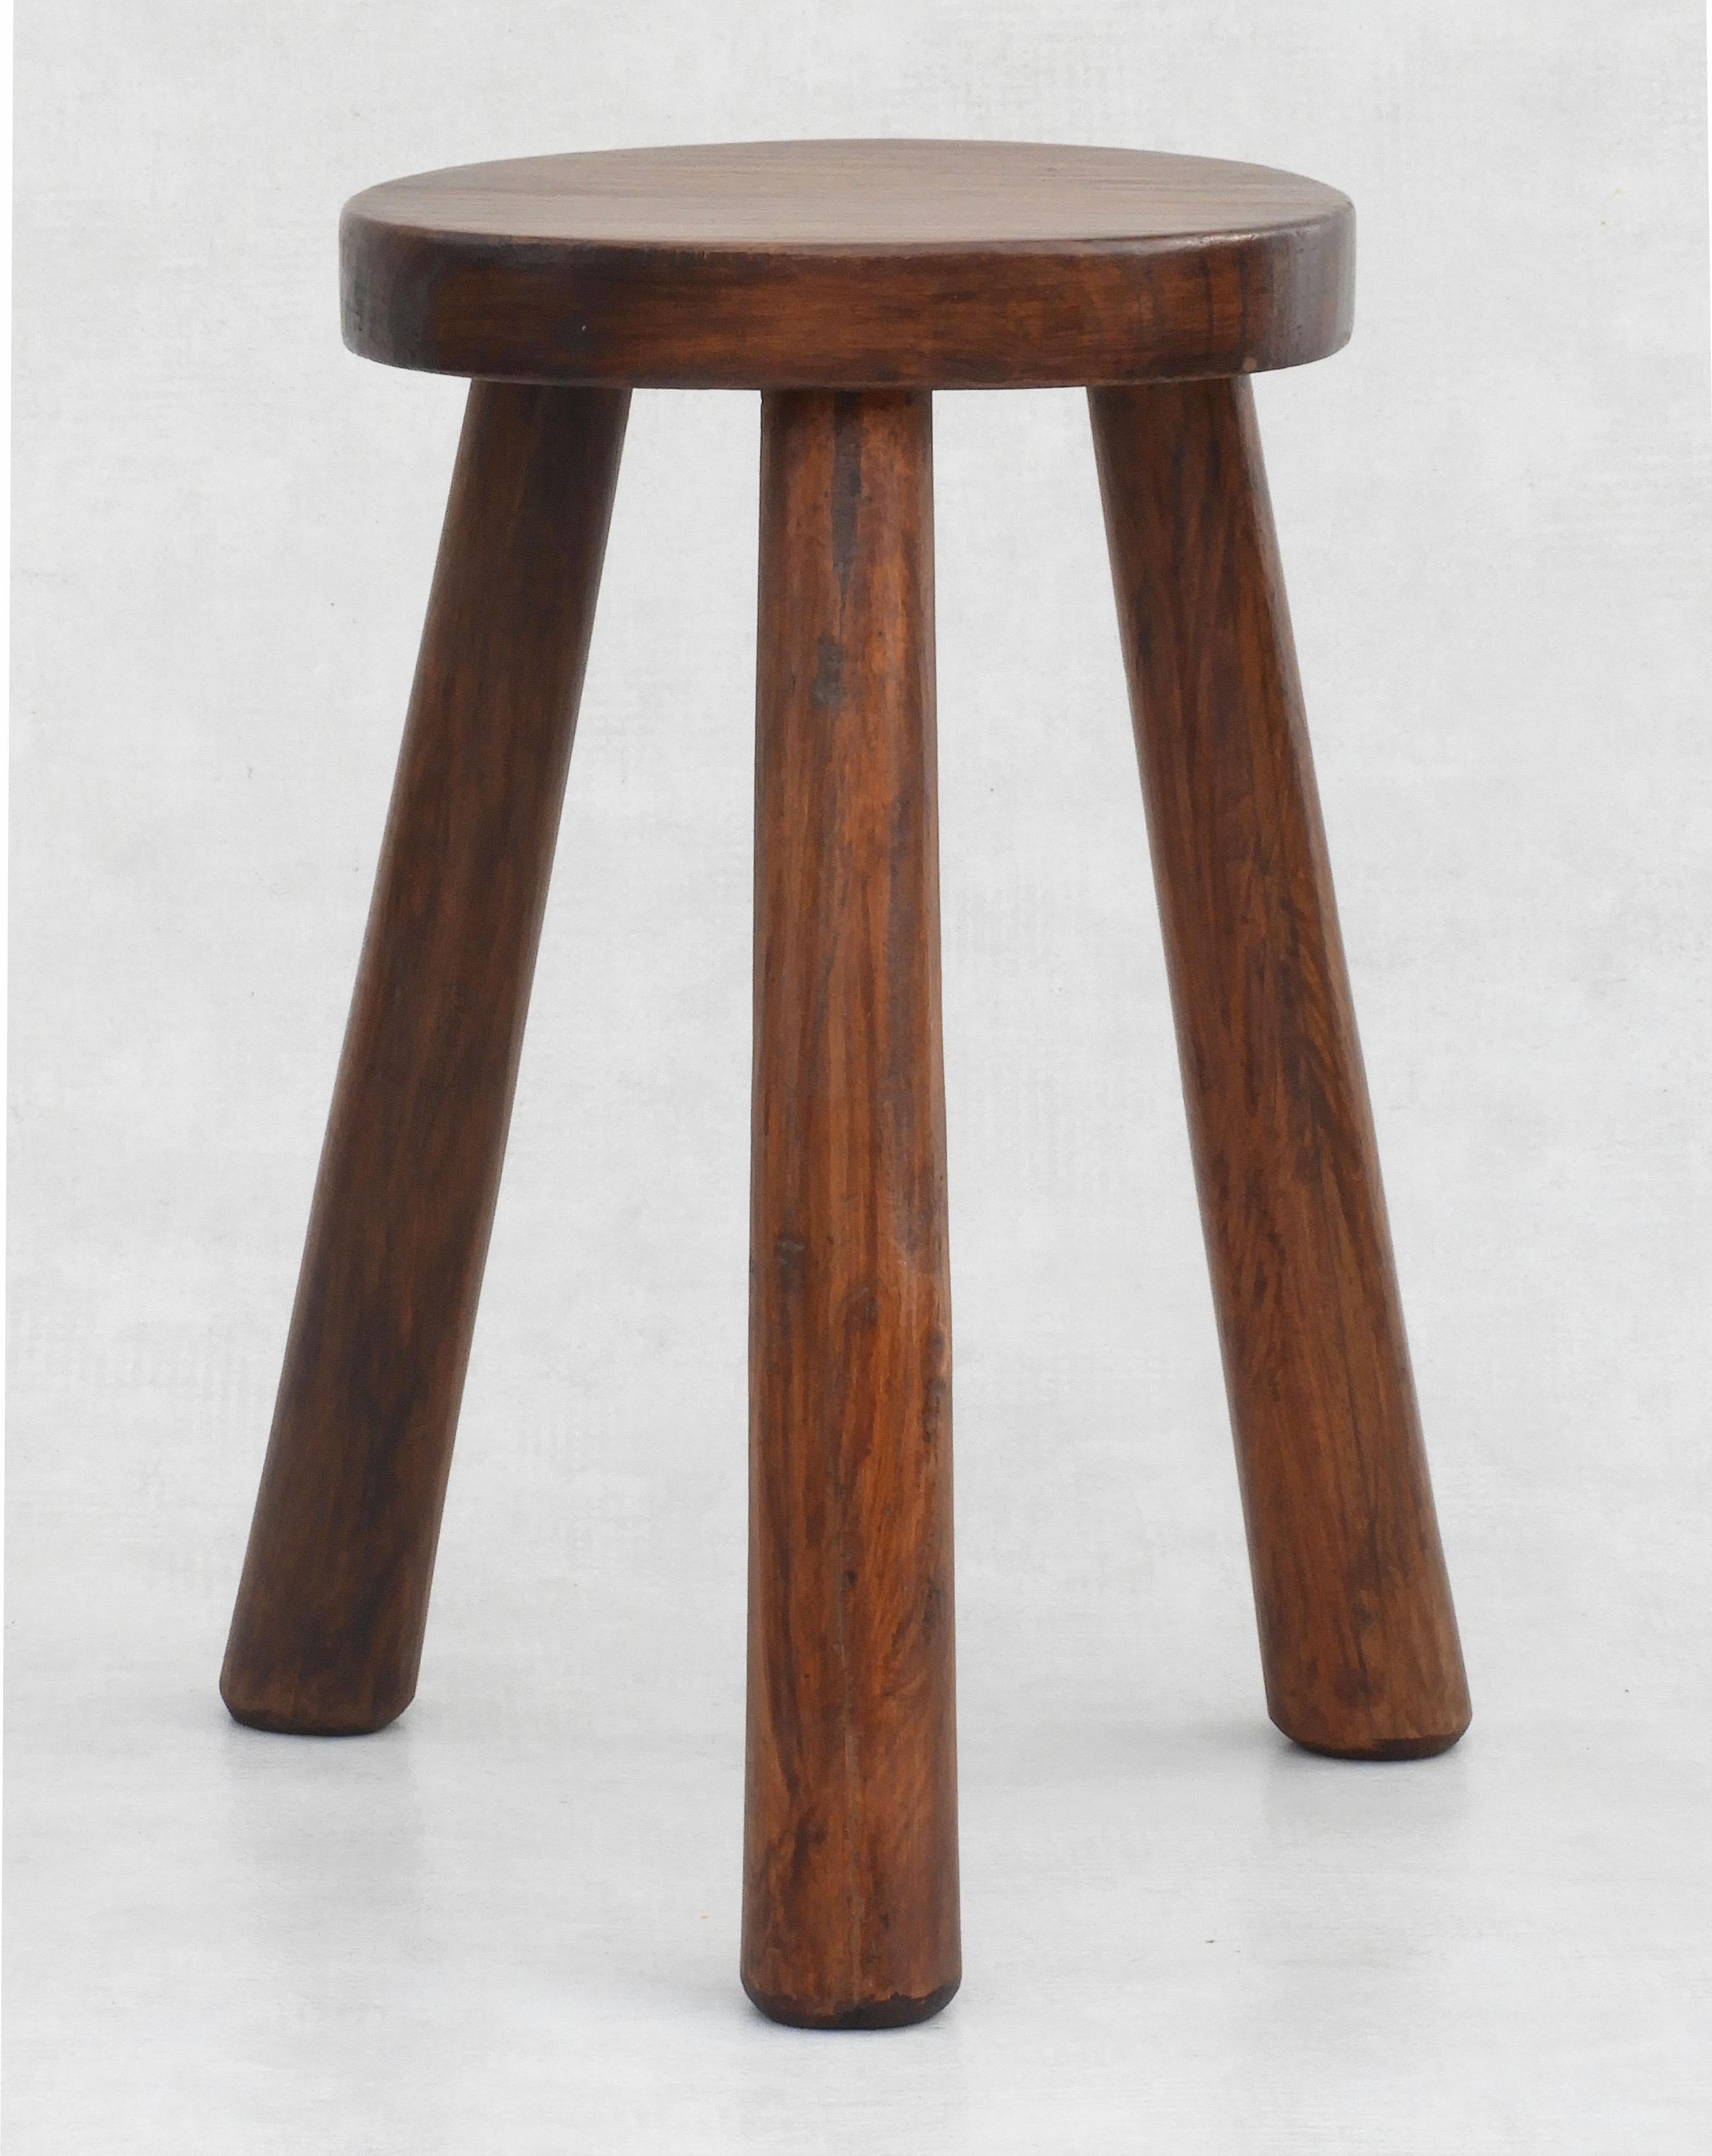 French Provincial Perriand Style Tripod Stool C1960s France For Sale